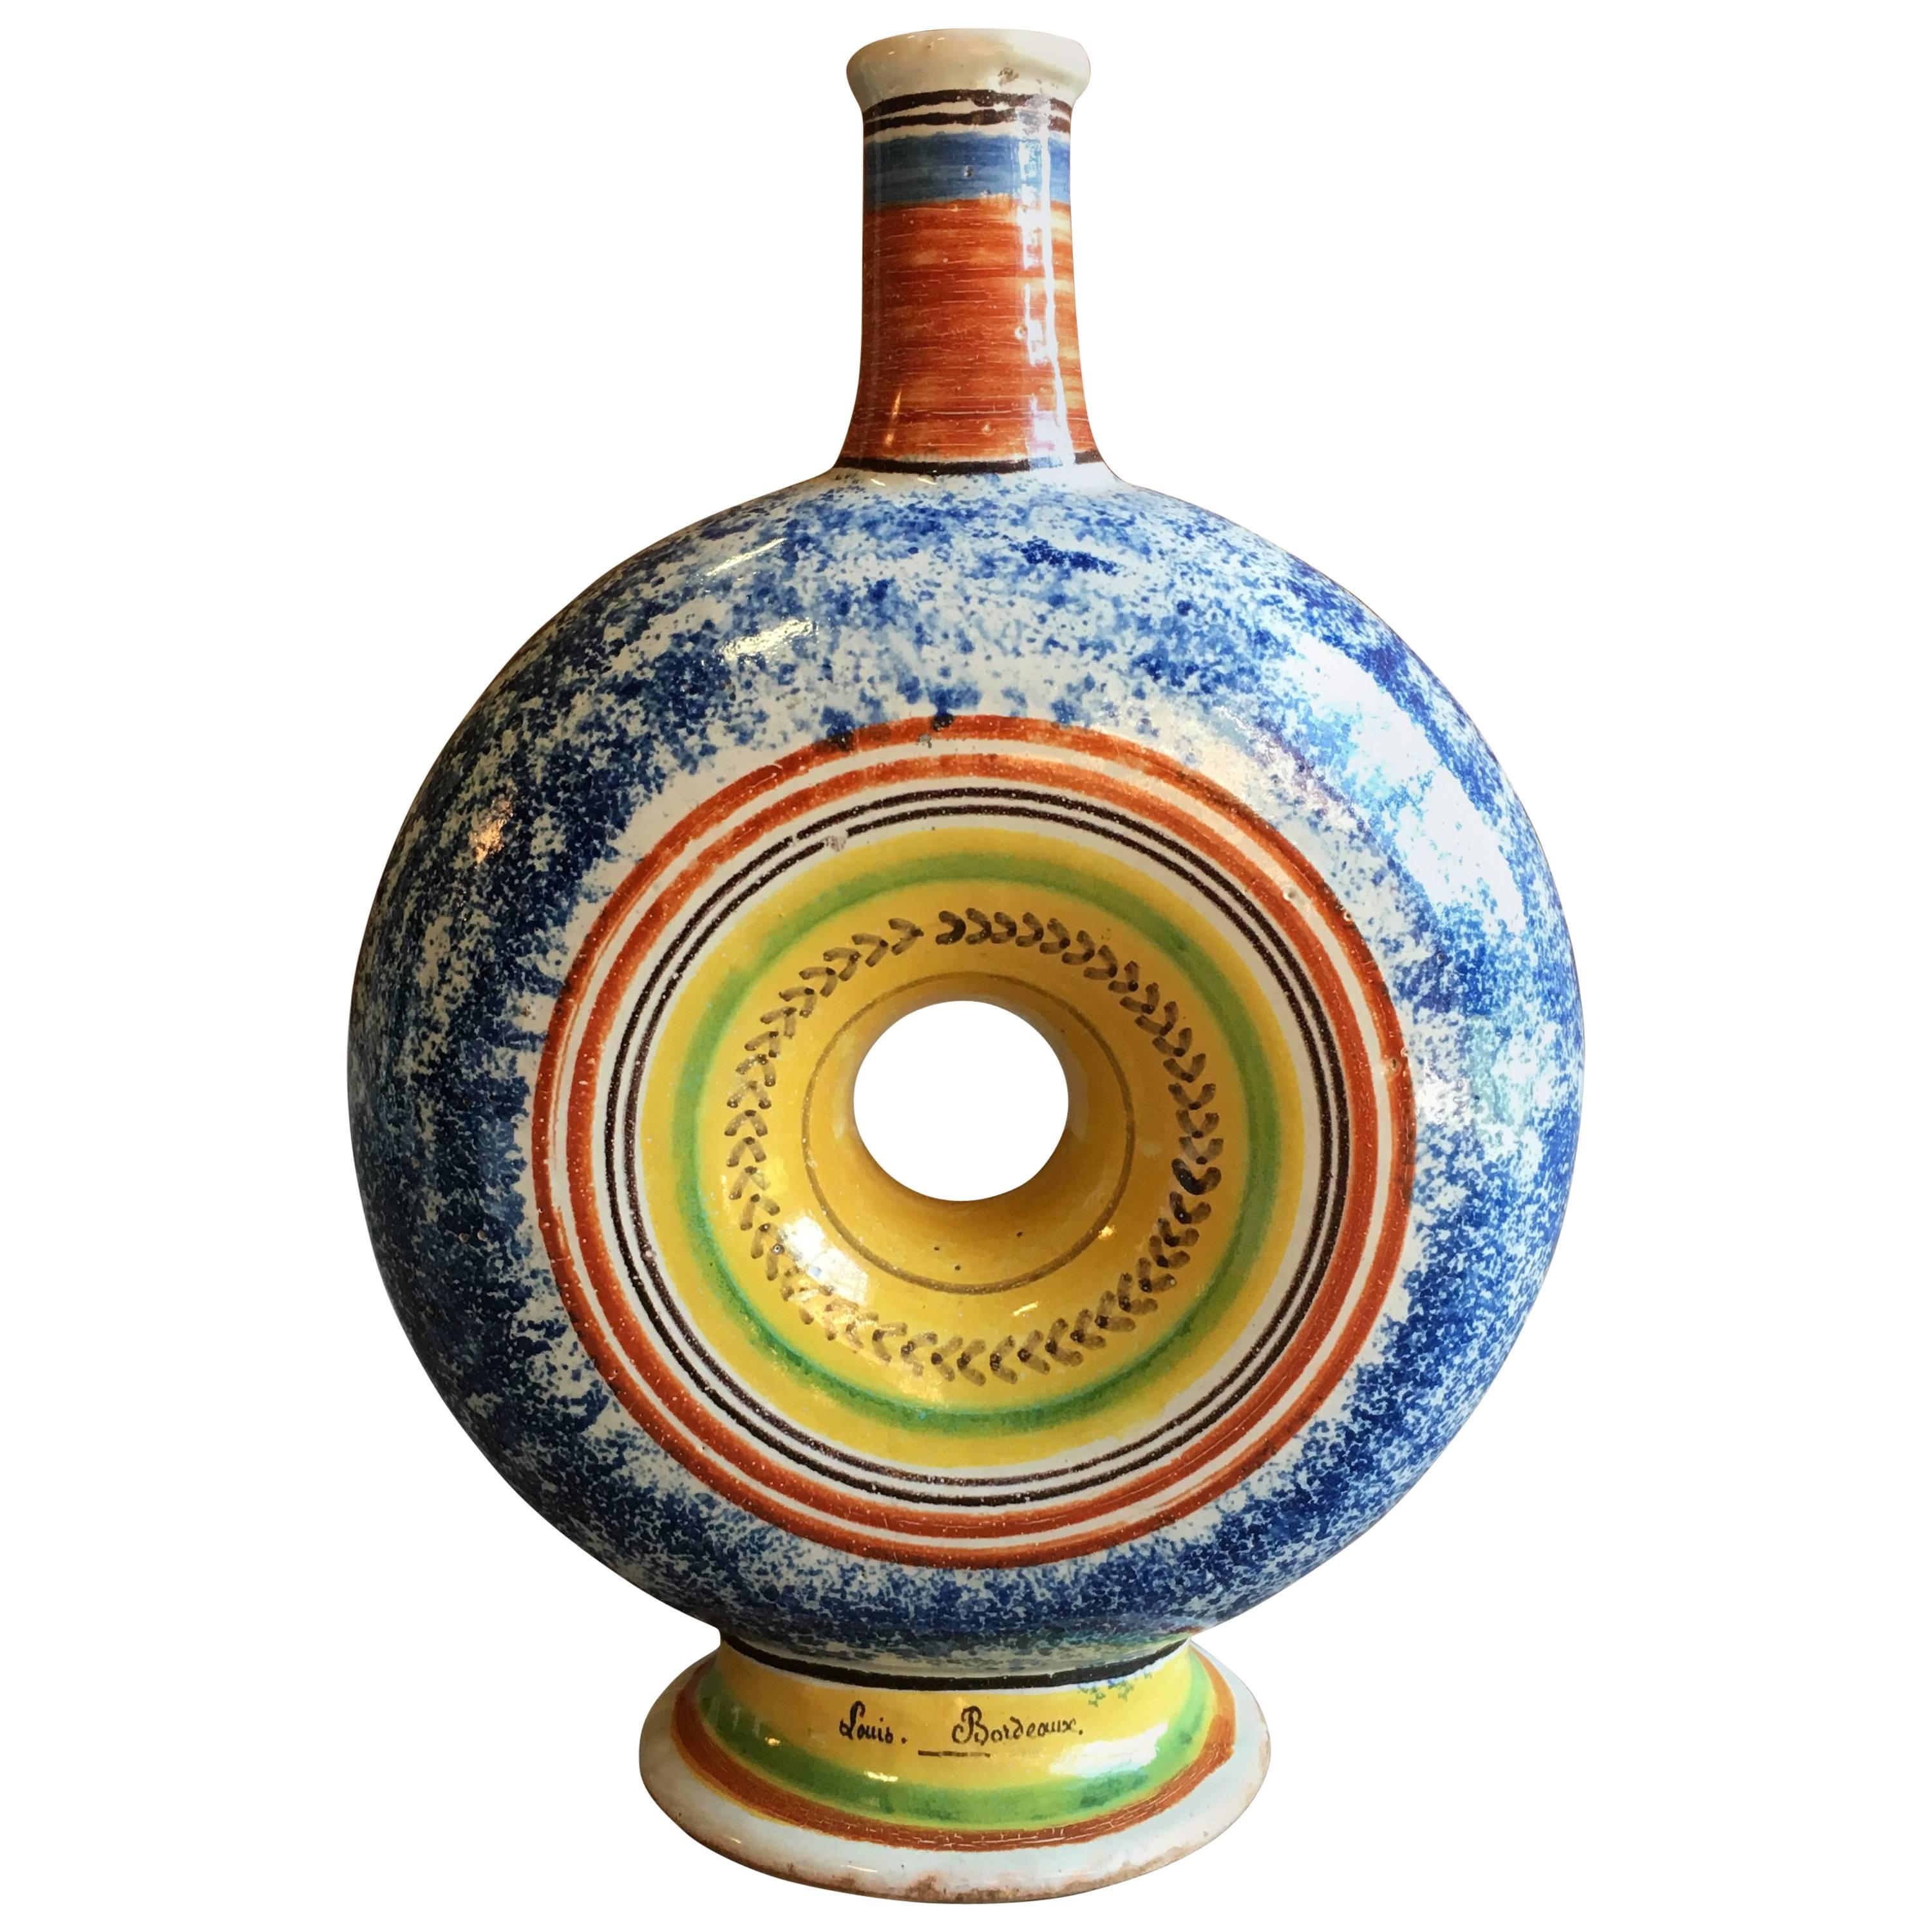 19th Century French Faience Bottle, Dated 1838